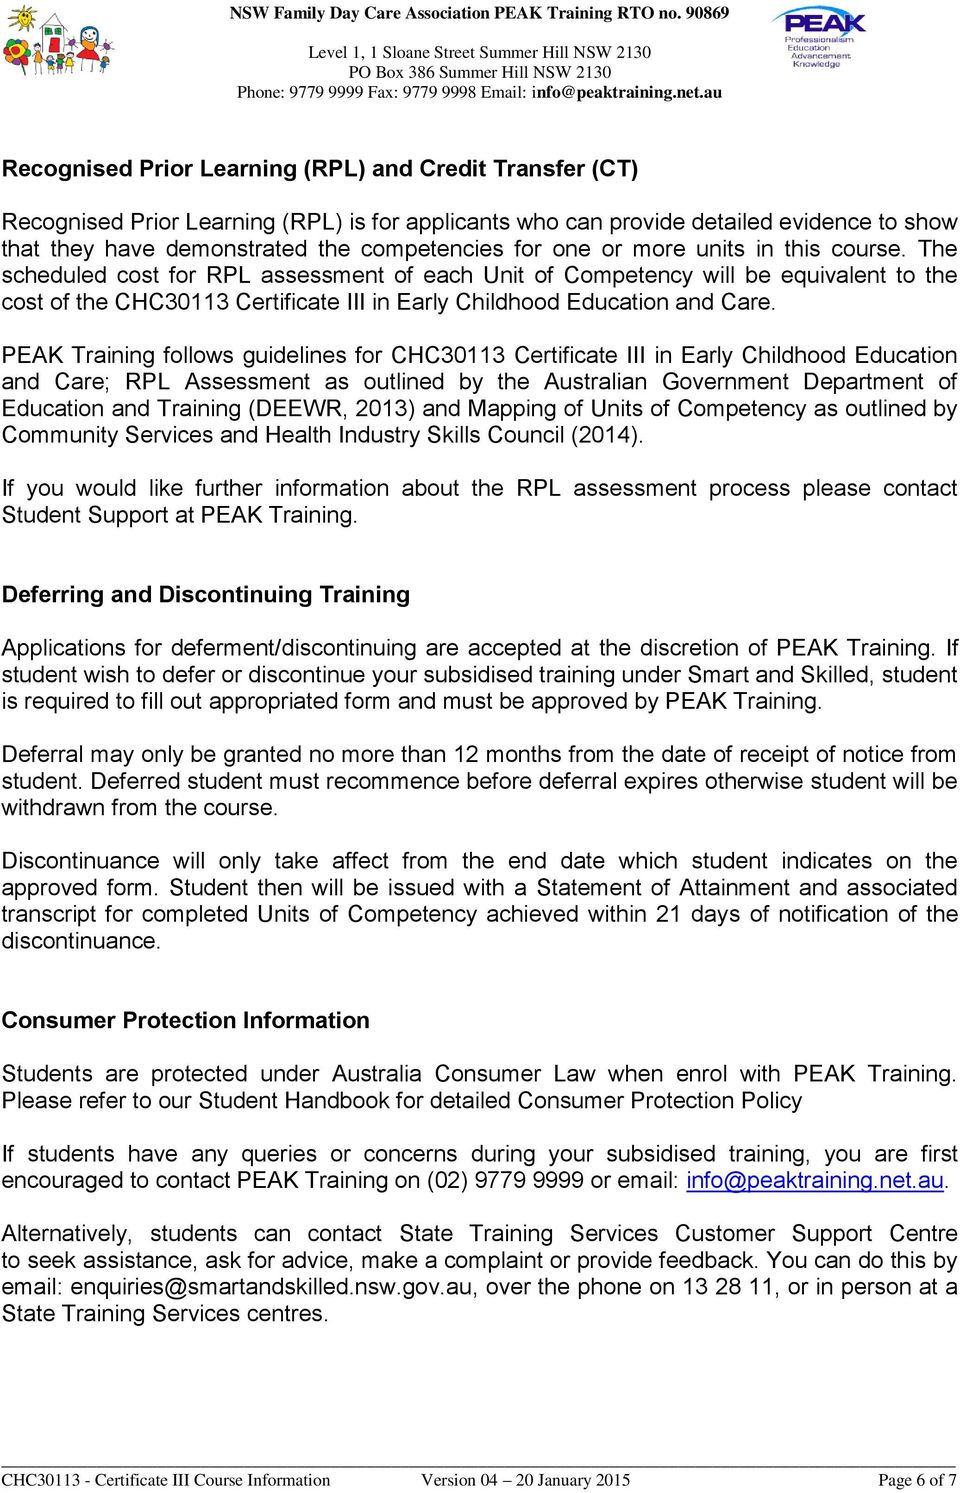 PEAK Training follows guidelines for CHC30113 Certificate III in Early Childhood Education and Care; RPL Assessment as outlined by the Australian Government Department of Education and Training